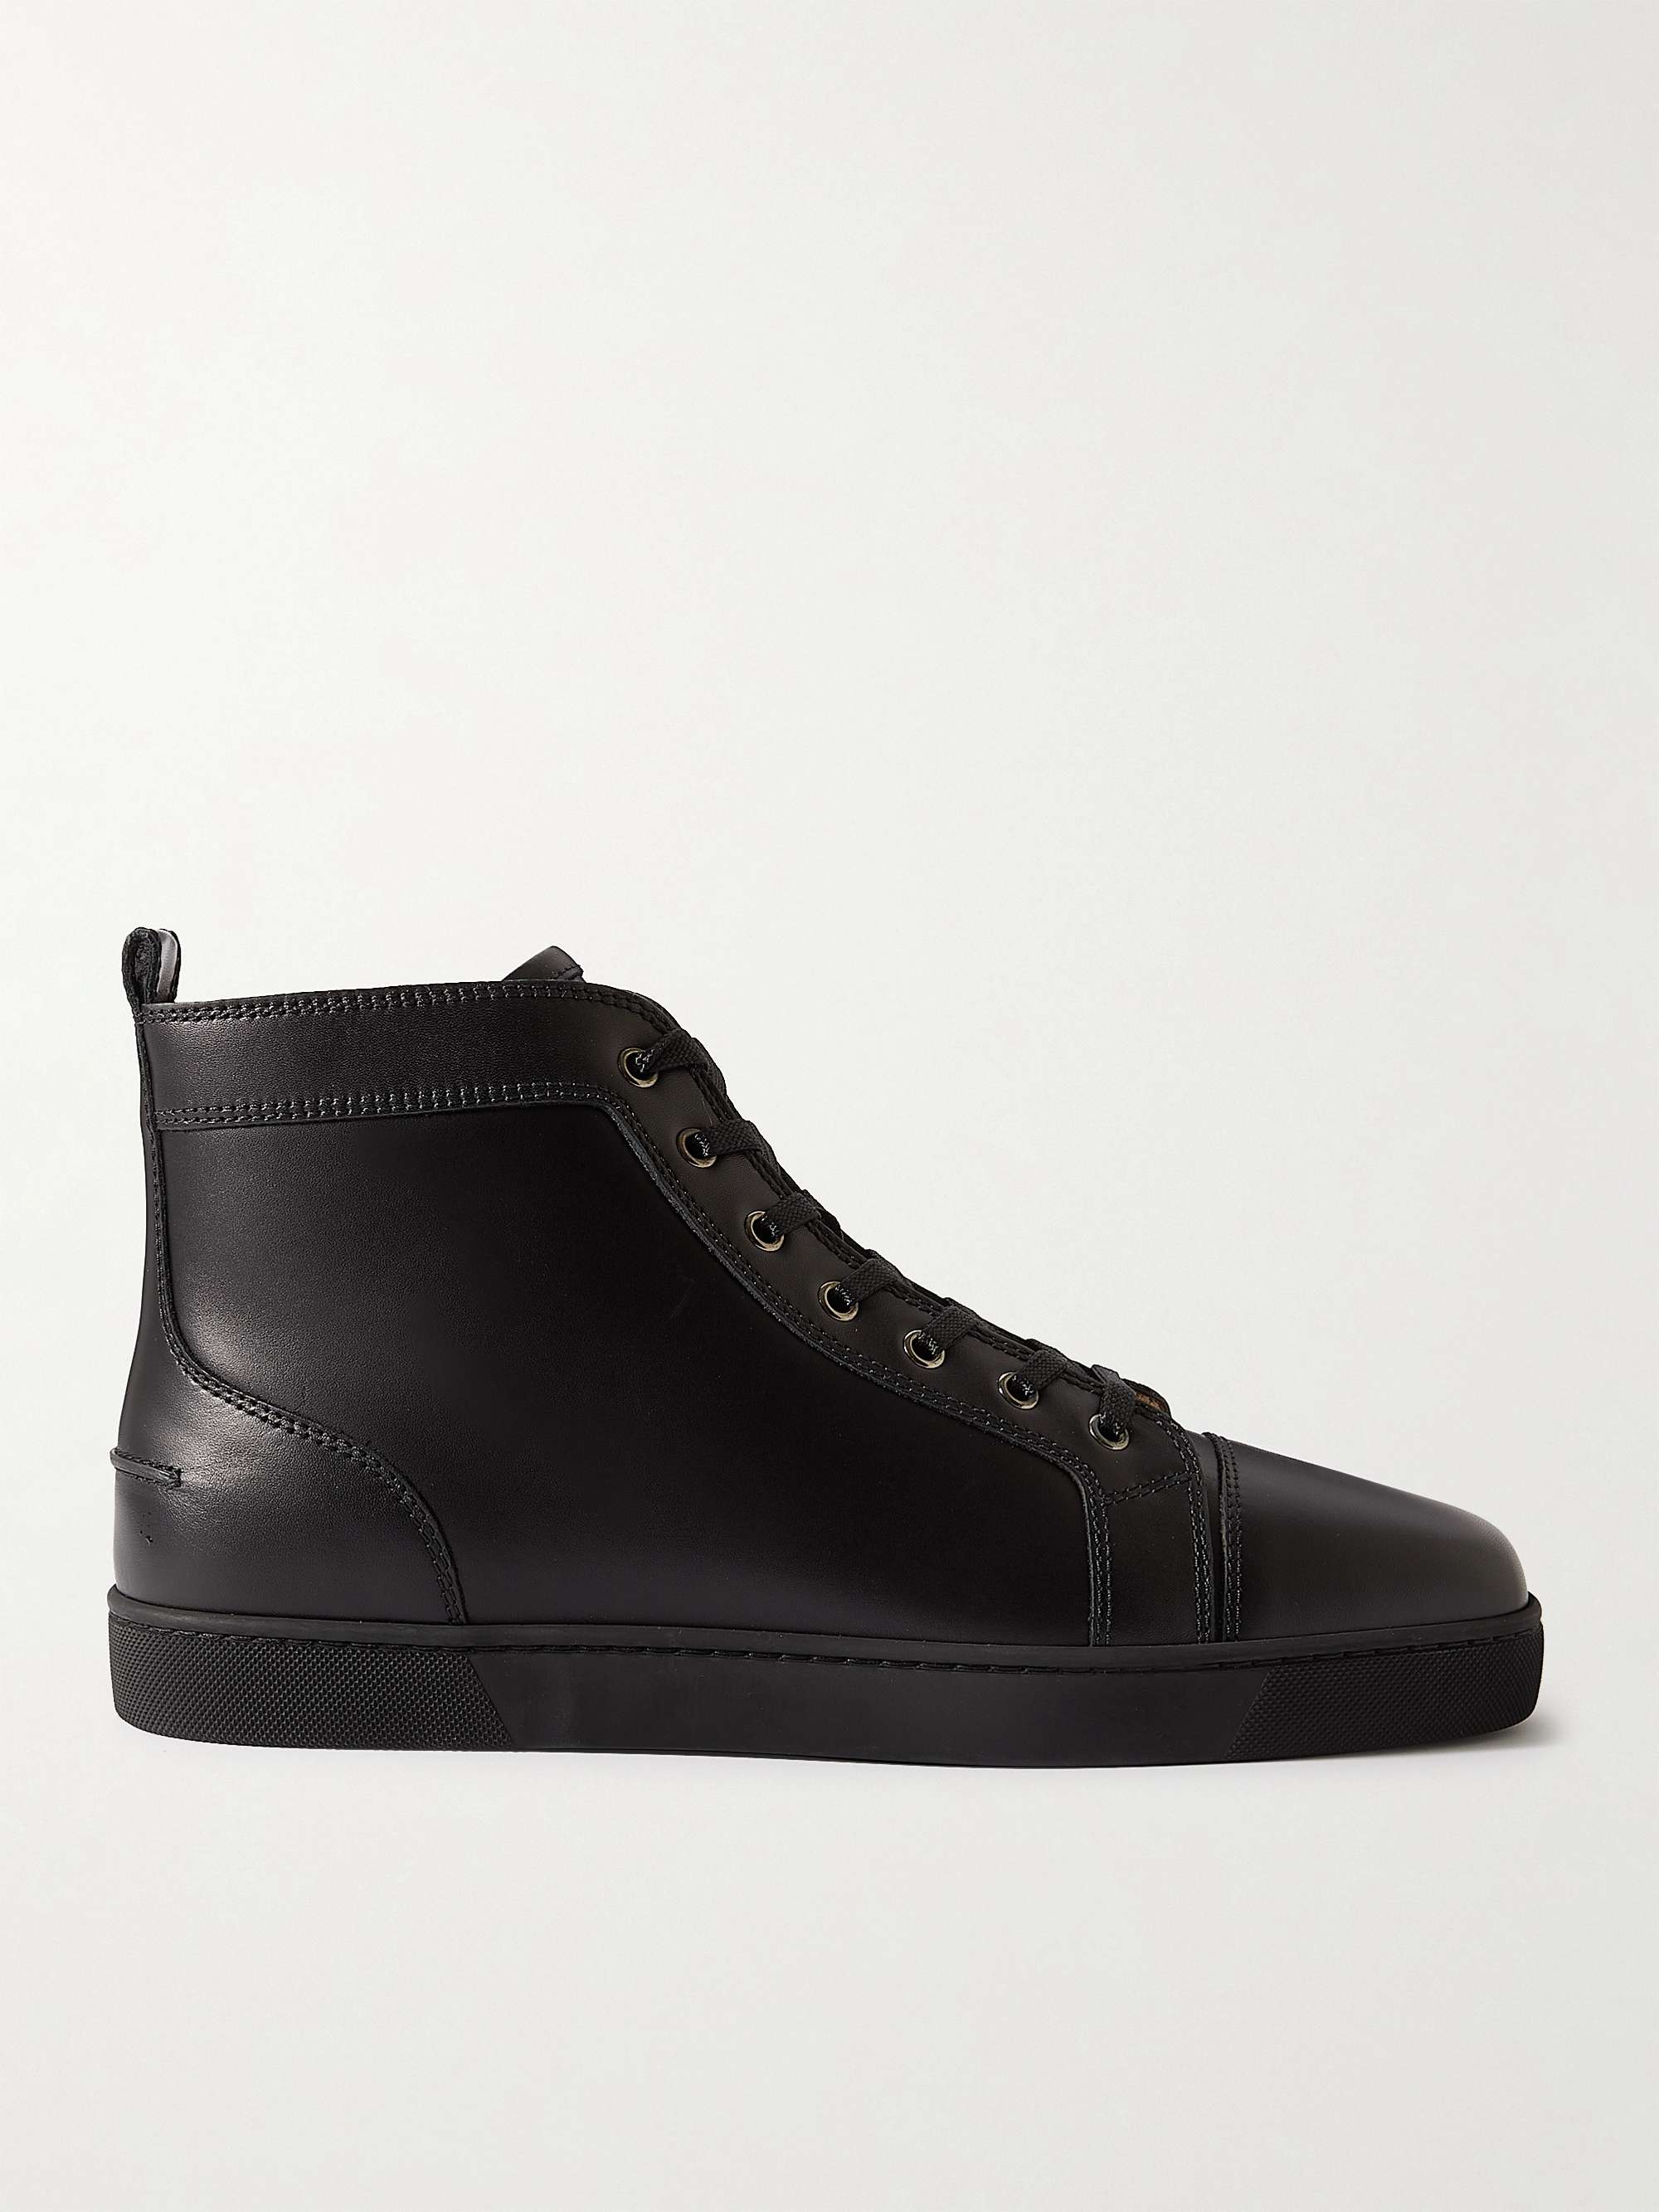 CHRISTIAN LOUBOUTIN Louis Leather High-Top Sneakers for Men | MR PORTER